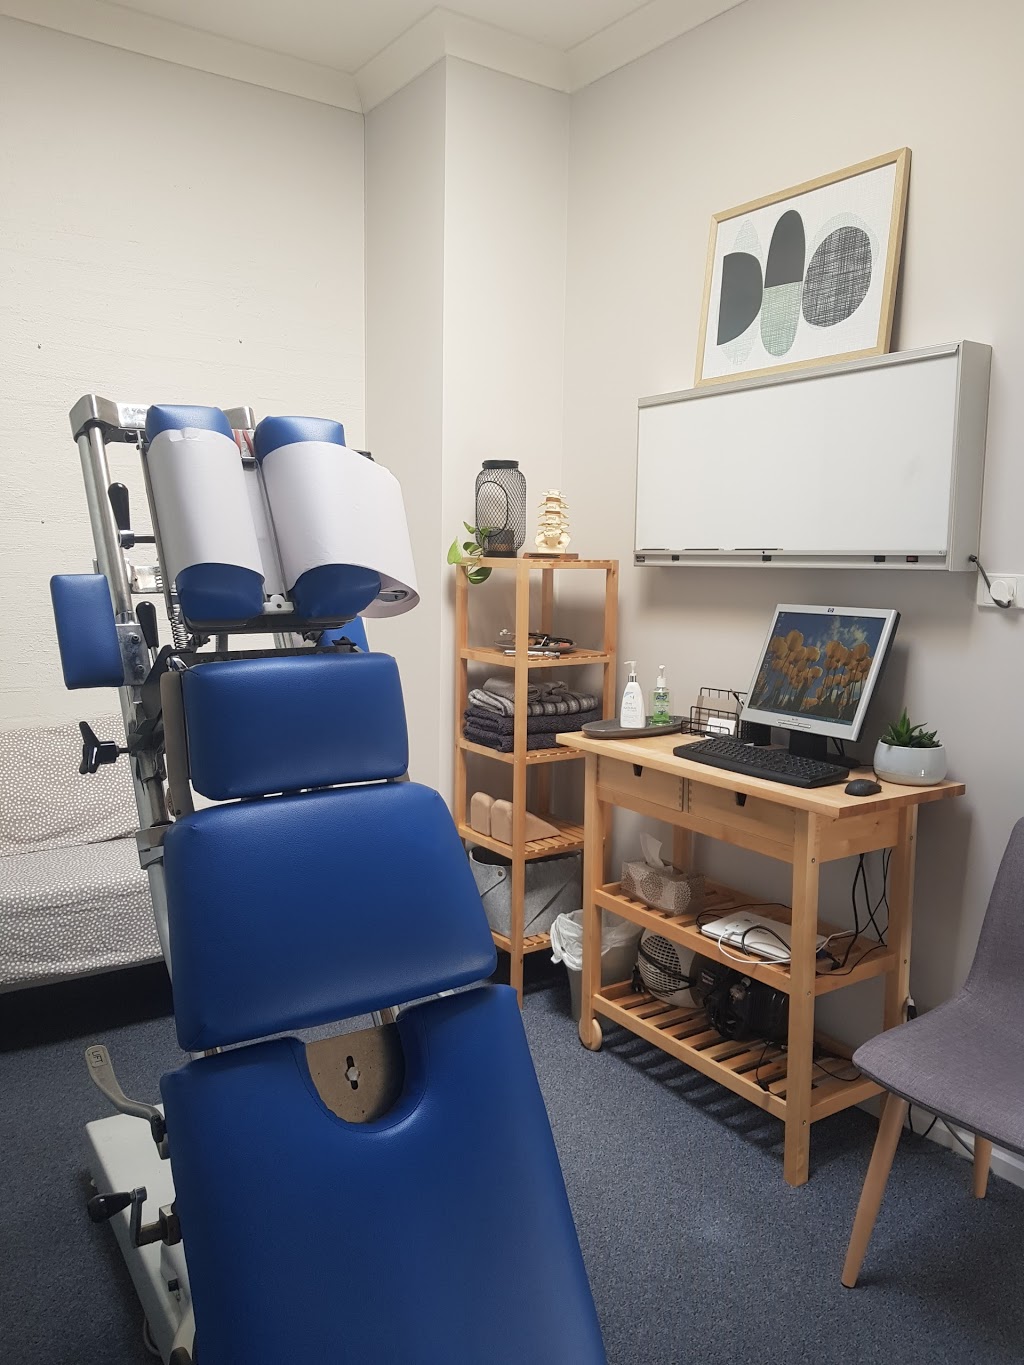 Bright Chiropractic and Osteopathy | 6 Suite 1/2B Star Rd, Bright VIC 3741, Australia | Phone: 0432 511 496